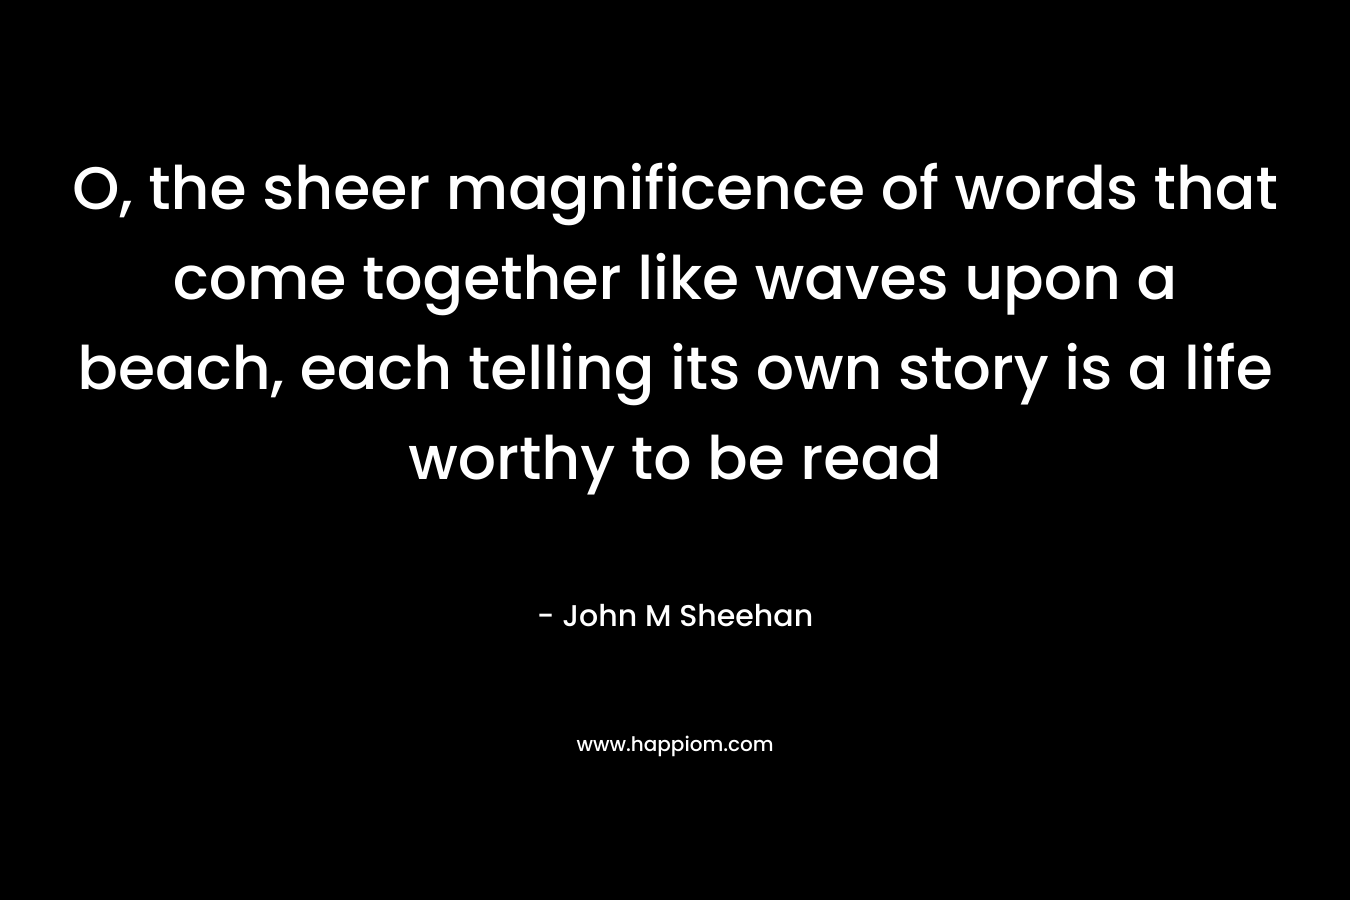 O, the sheer magnificence of words that come together like waves upon a beach, each telling its own story is a life worthy to be read